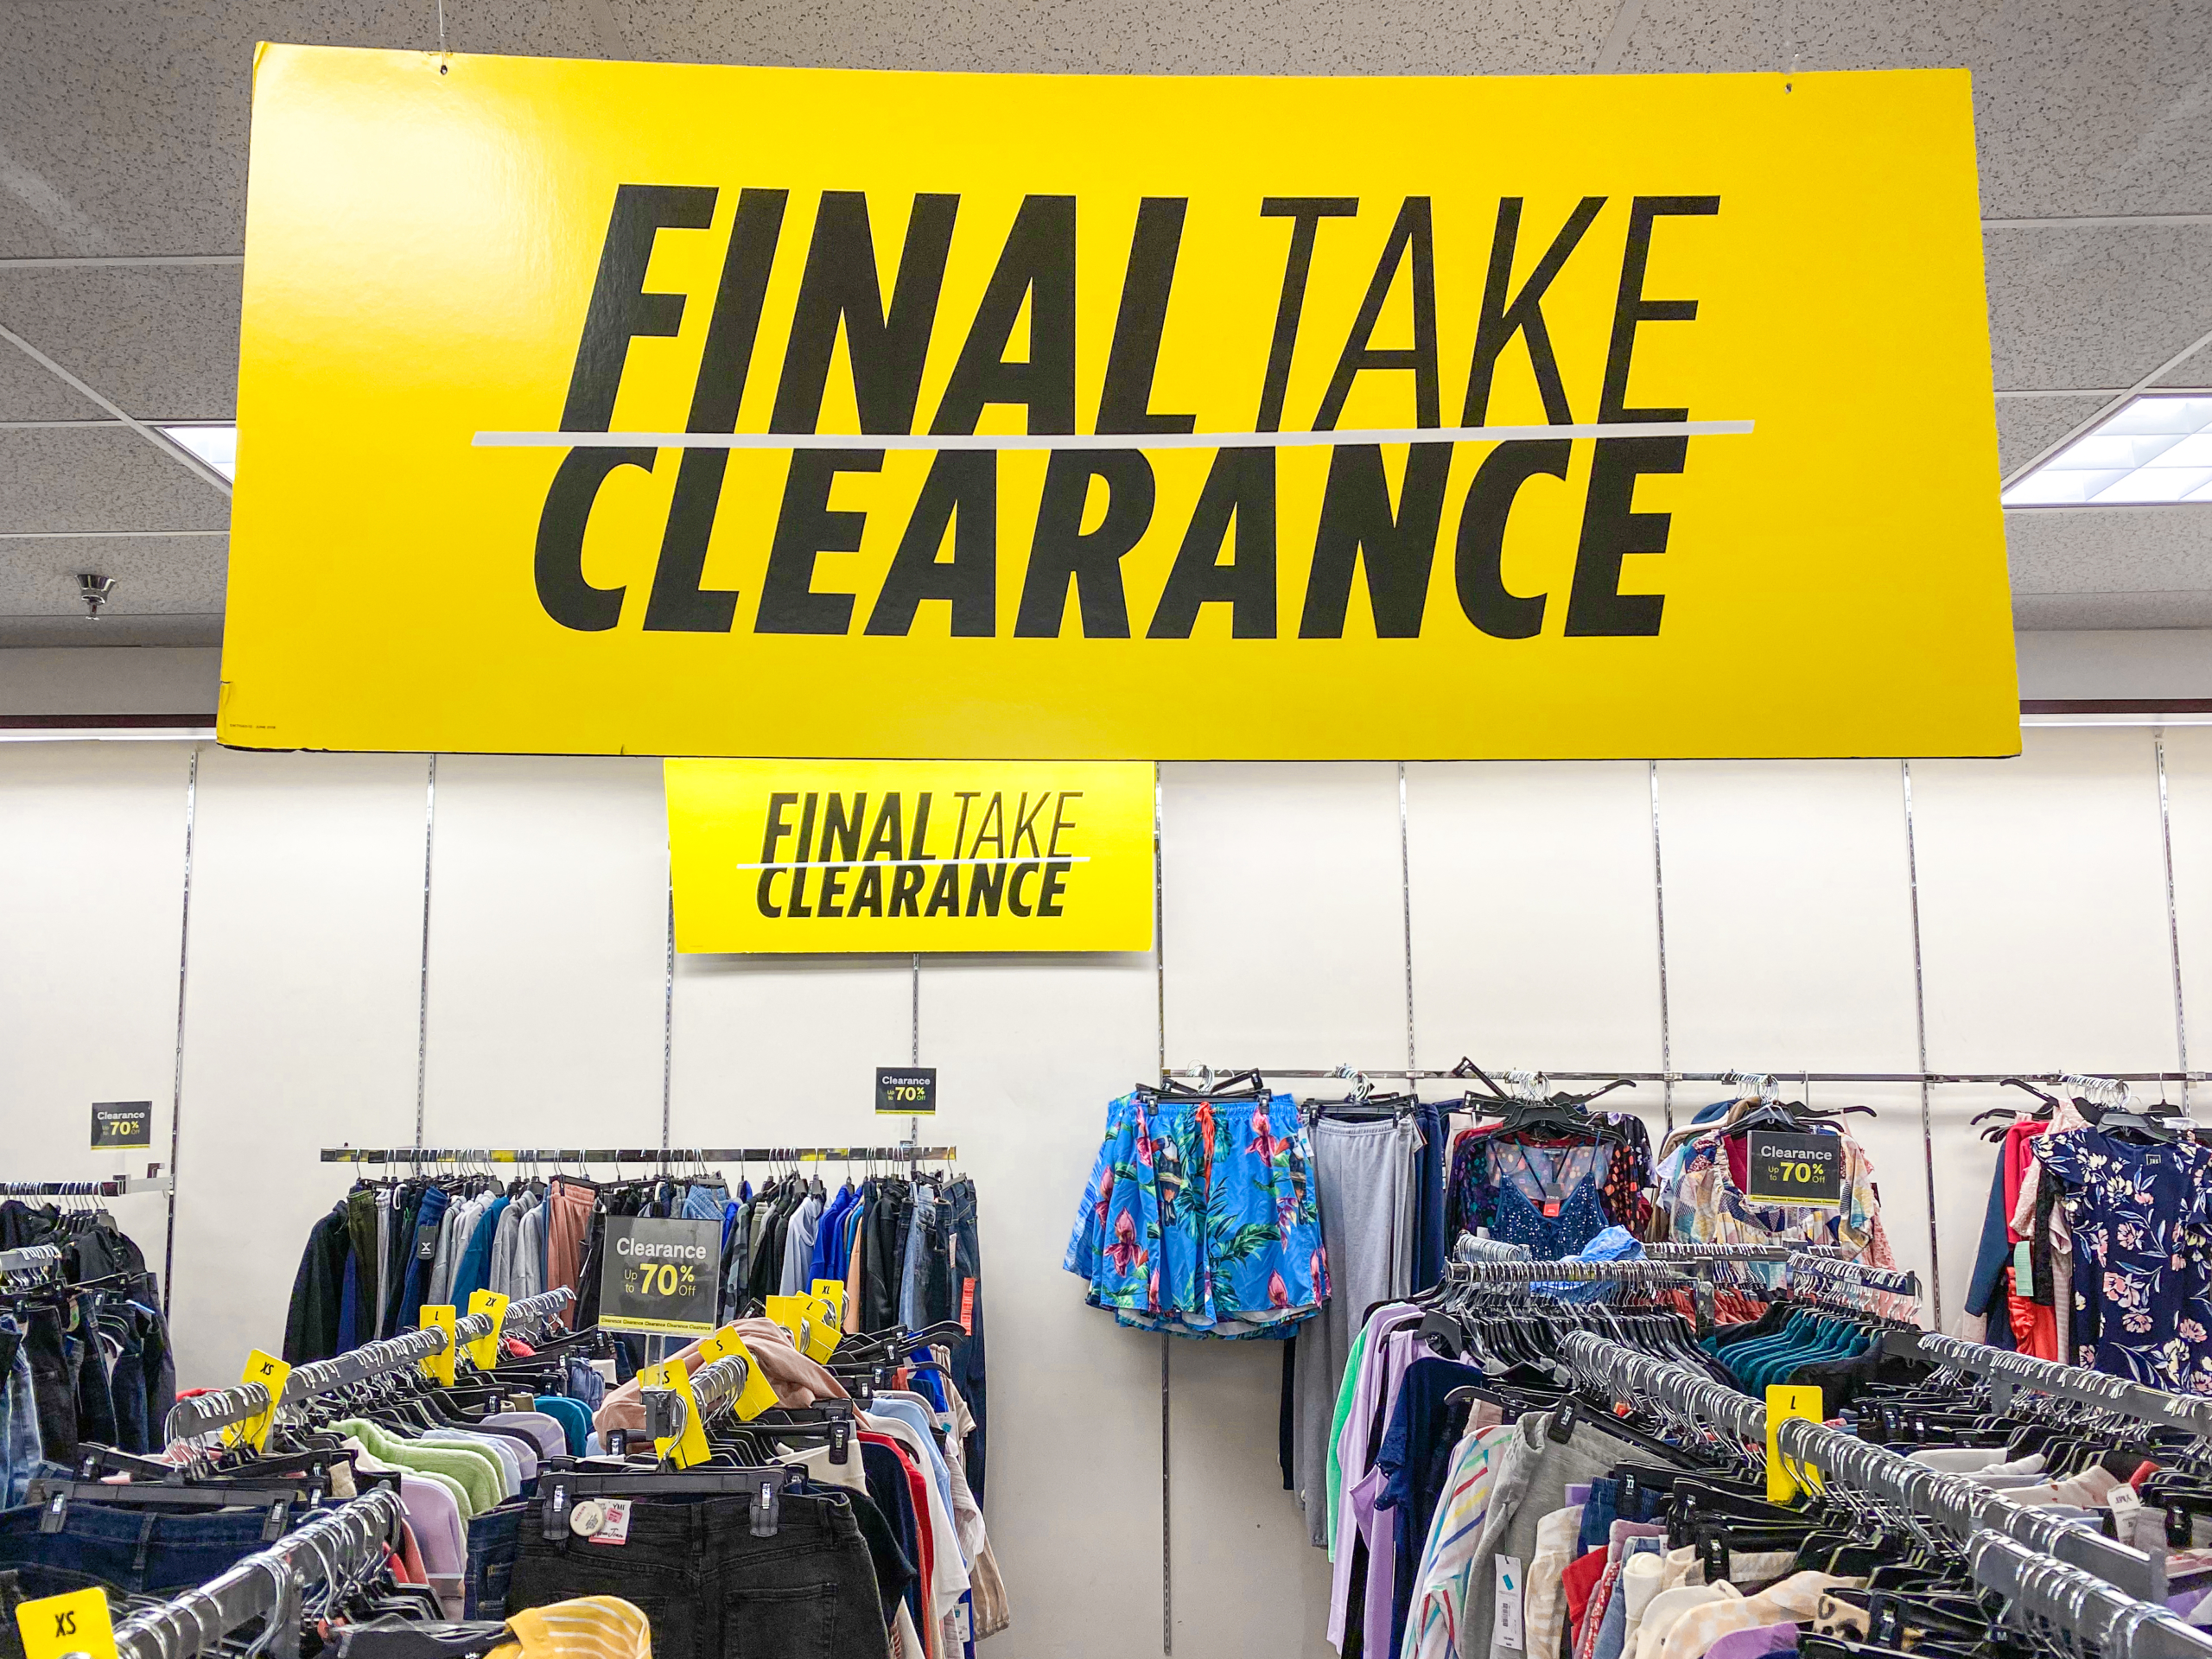 The Best Clearance Finds at JCPenney: $3 Fuzzy Socks, $7 Throw, and More -  The Krazy Coupon Lady